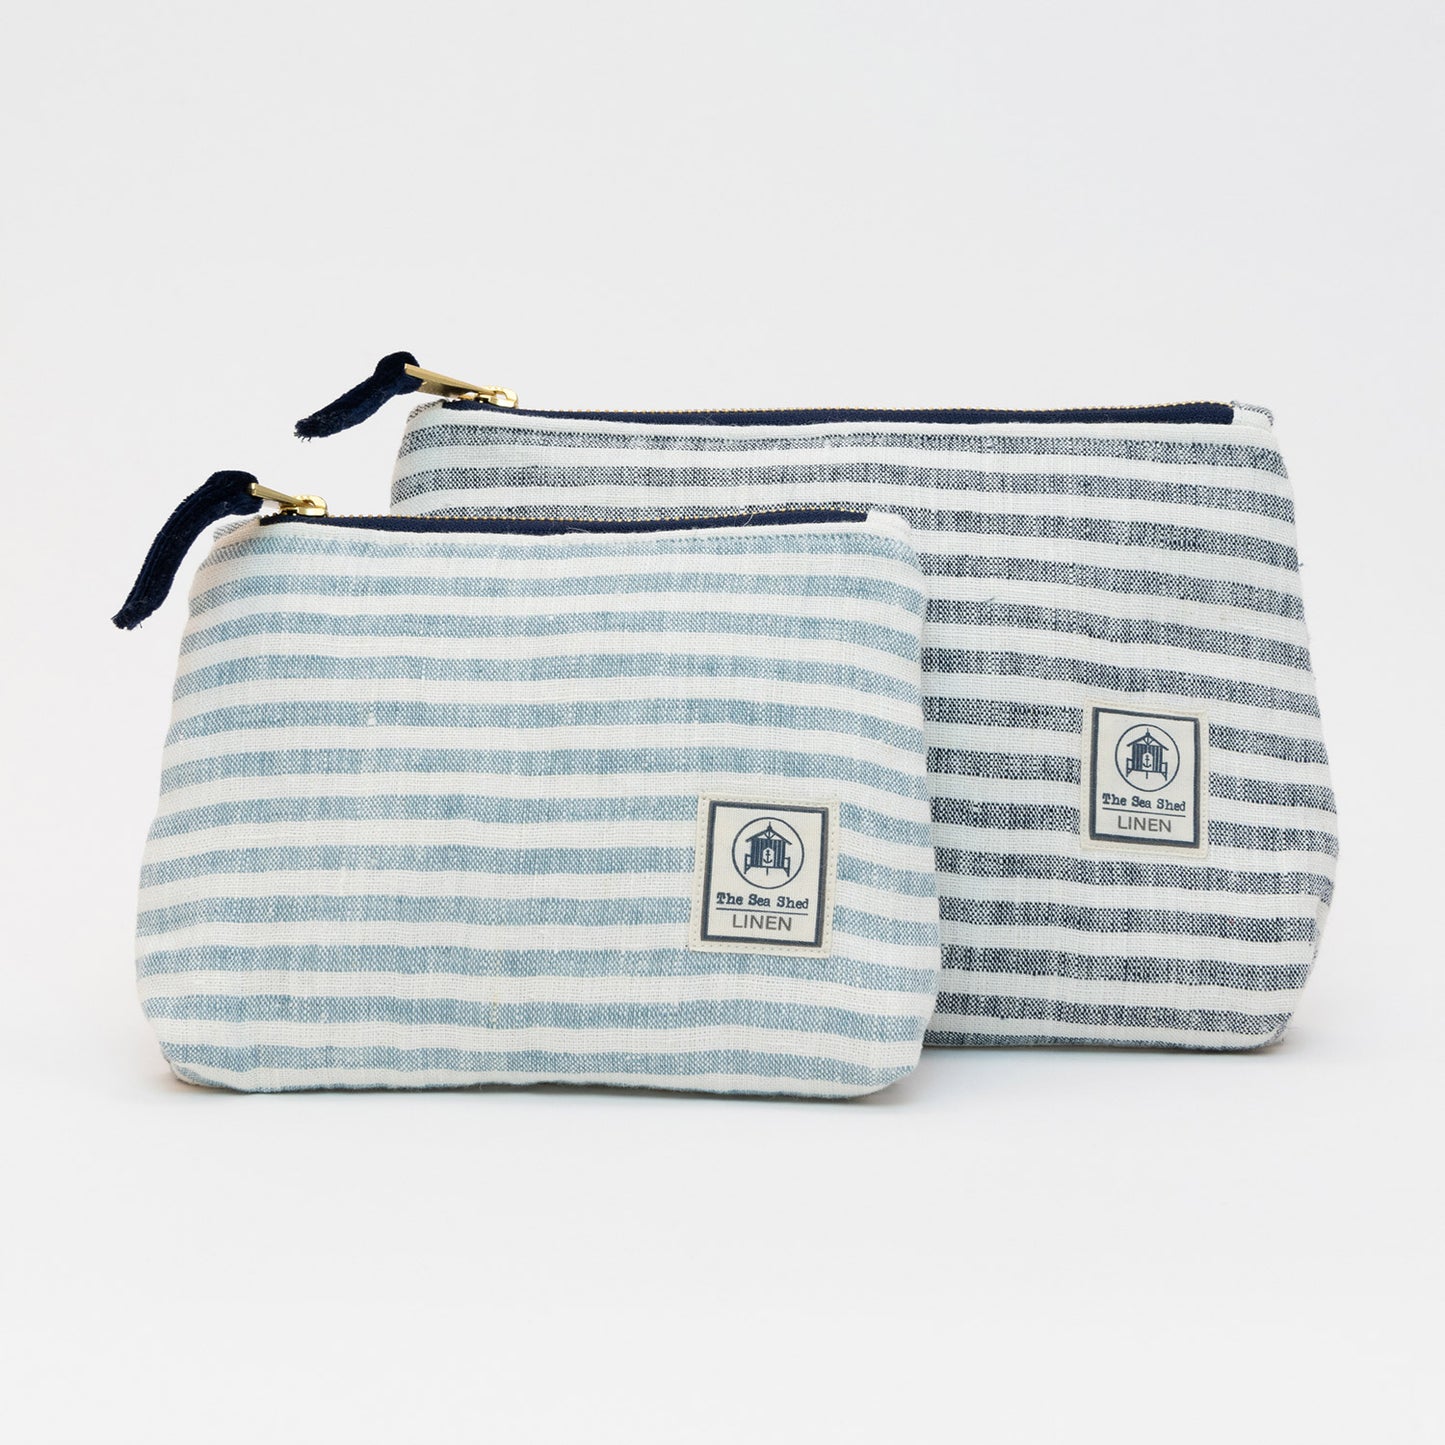 A photo of the large and small linen cosmetic bags on a white background. They have white and blue stripes.